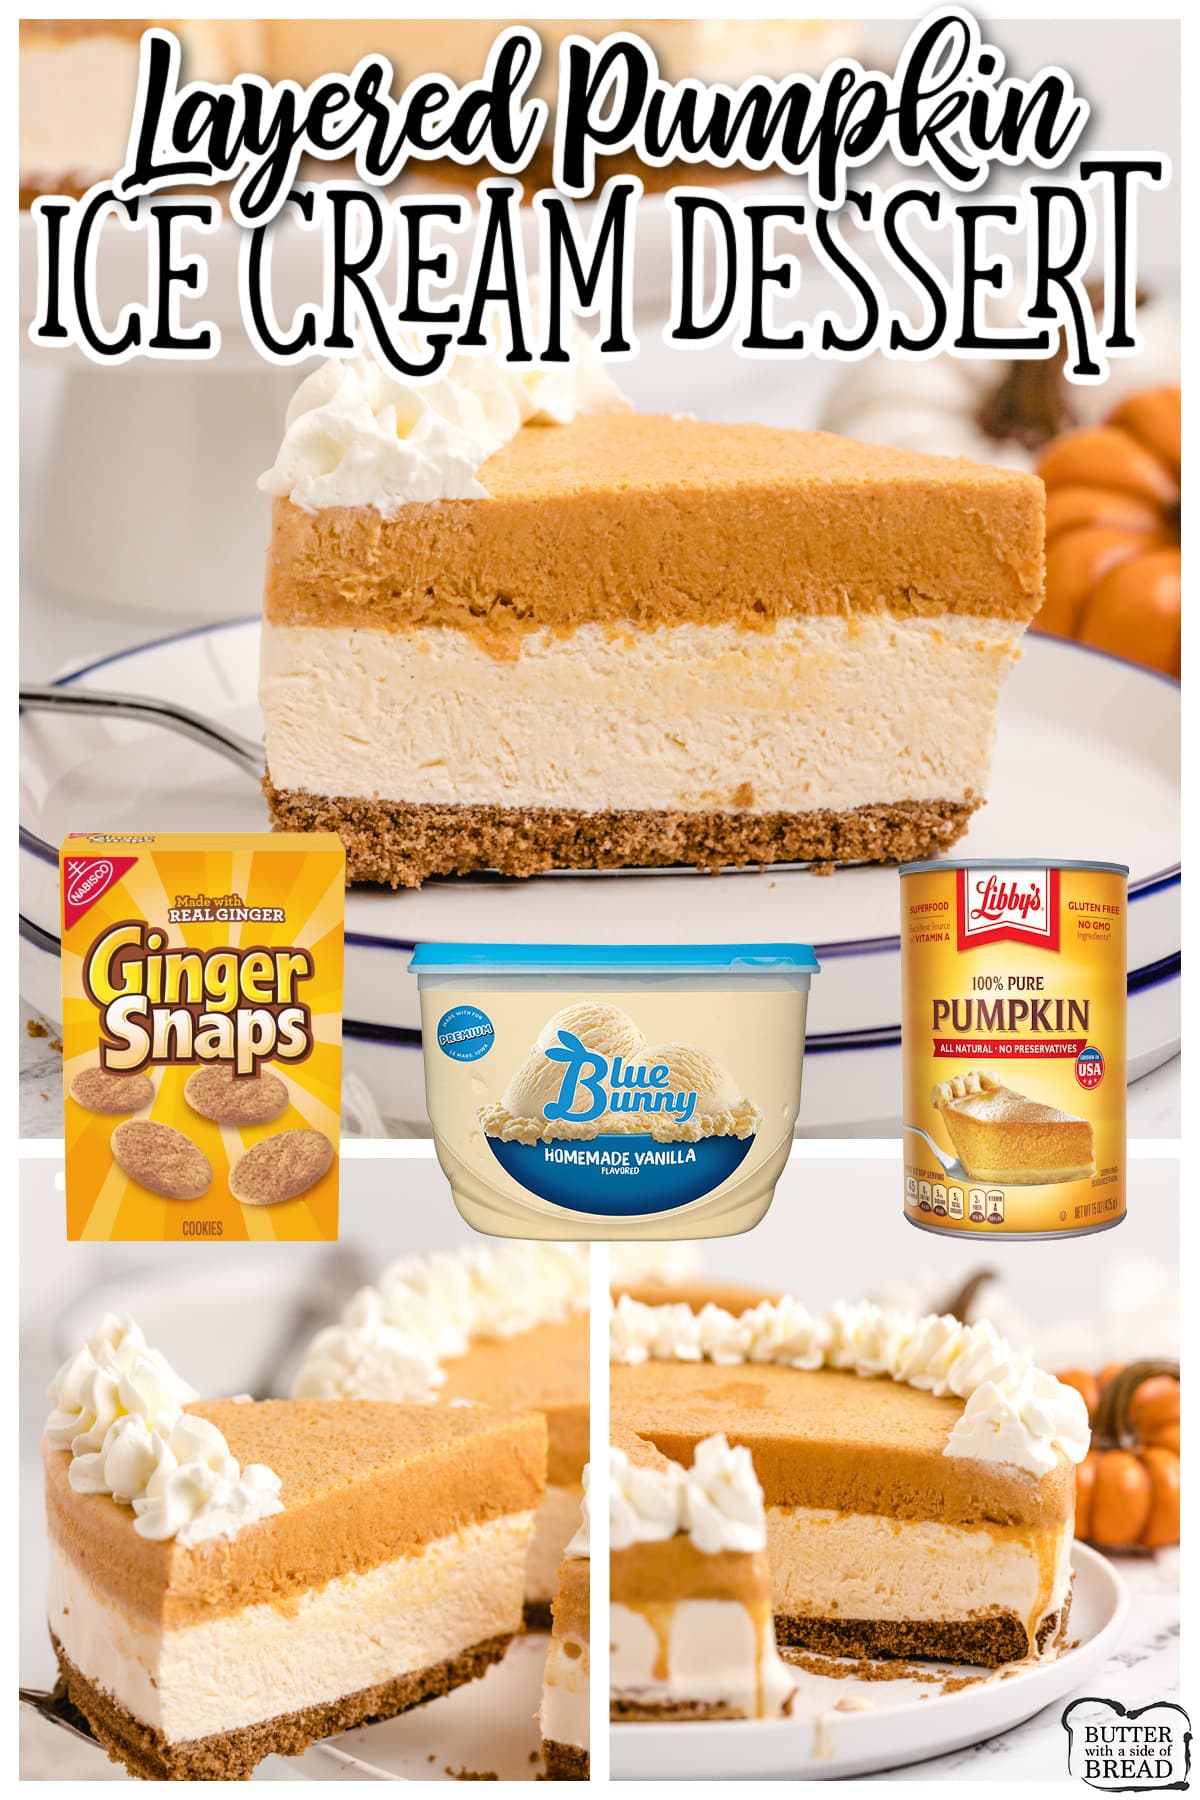 Layered Pumpkin Ice Cream Dessert is made with a gingersnap cookie crust with layers of pumpkin and vanilla ice cream. This delicious no bake pumpkin pie is absolutely perfect for the fall season!